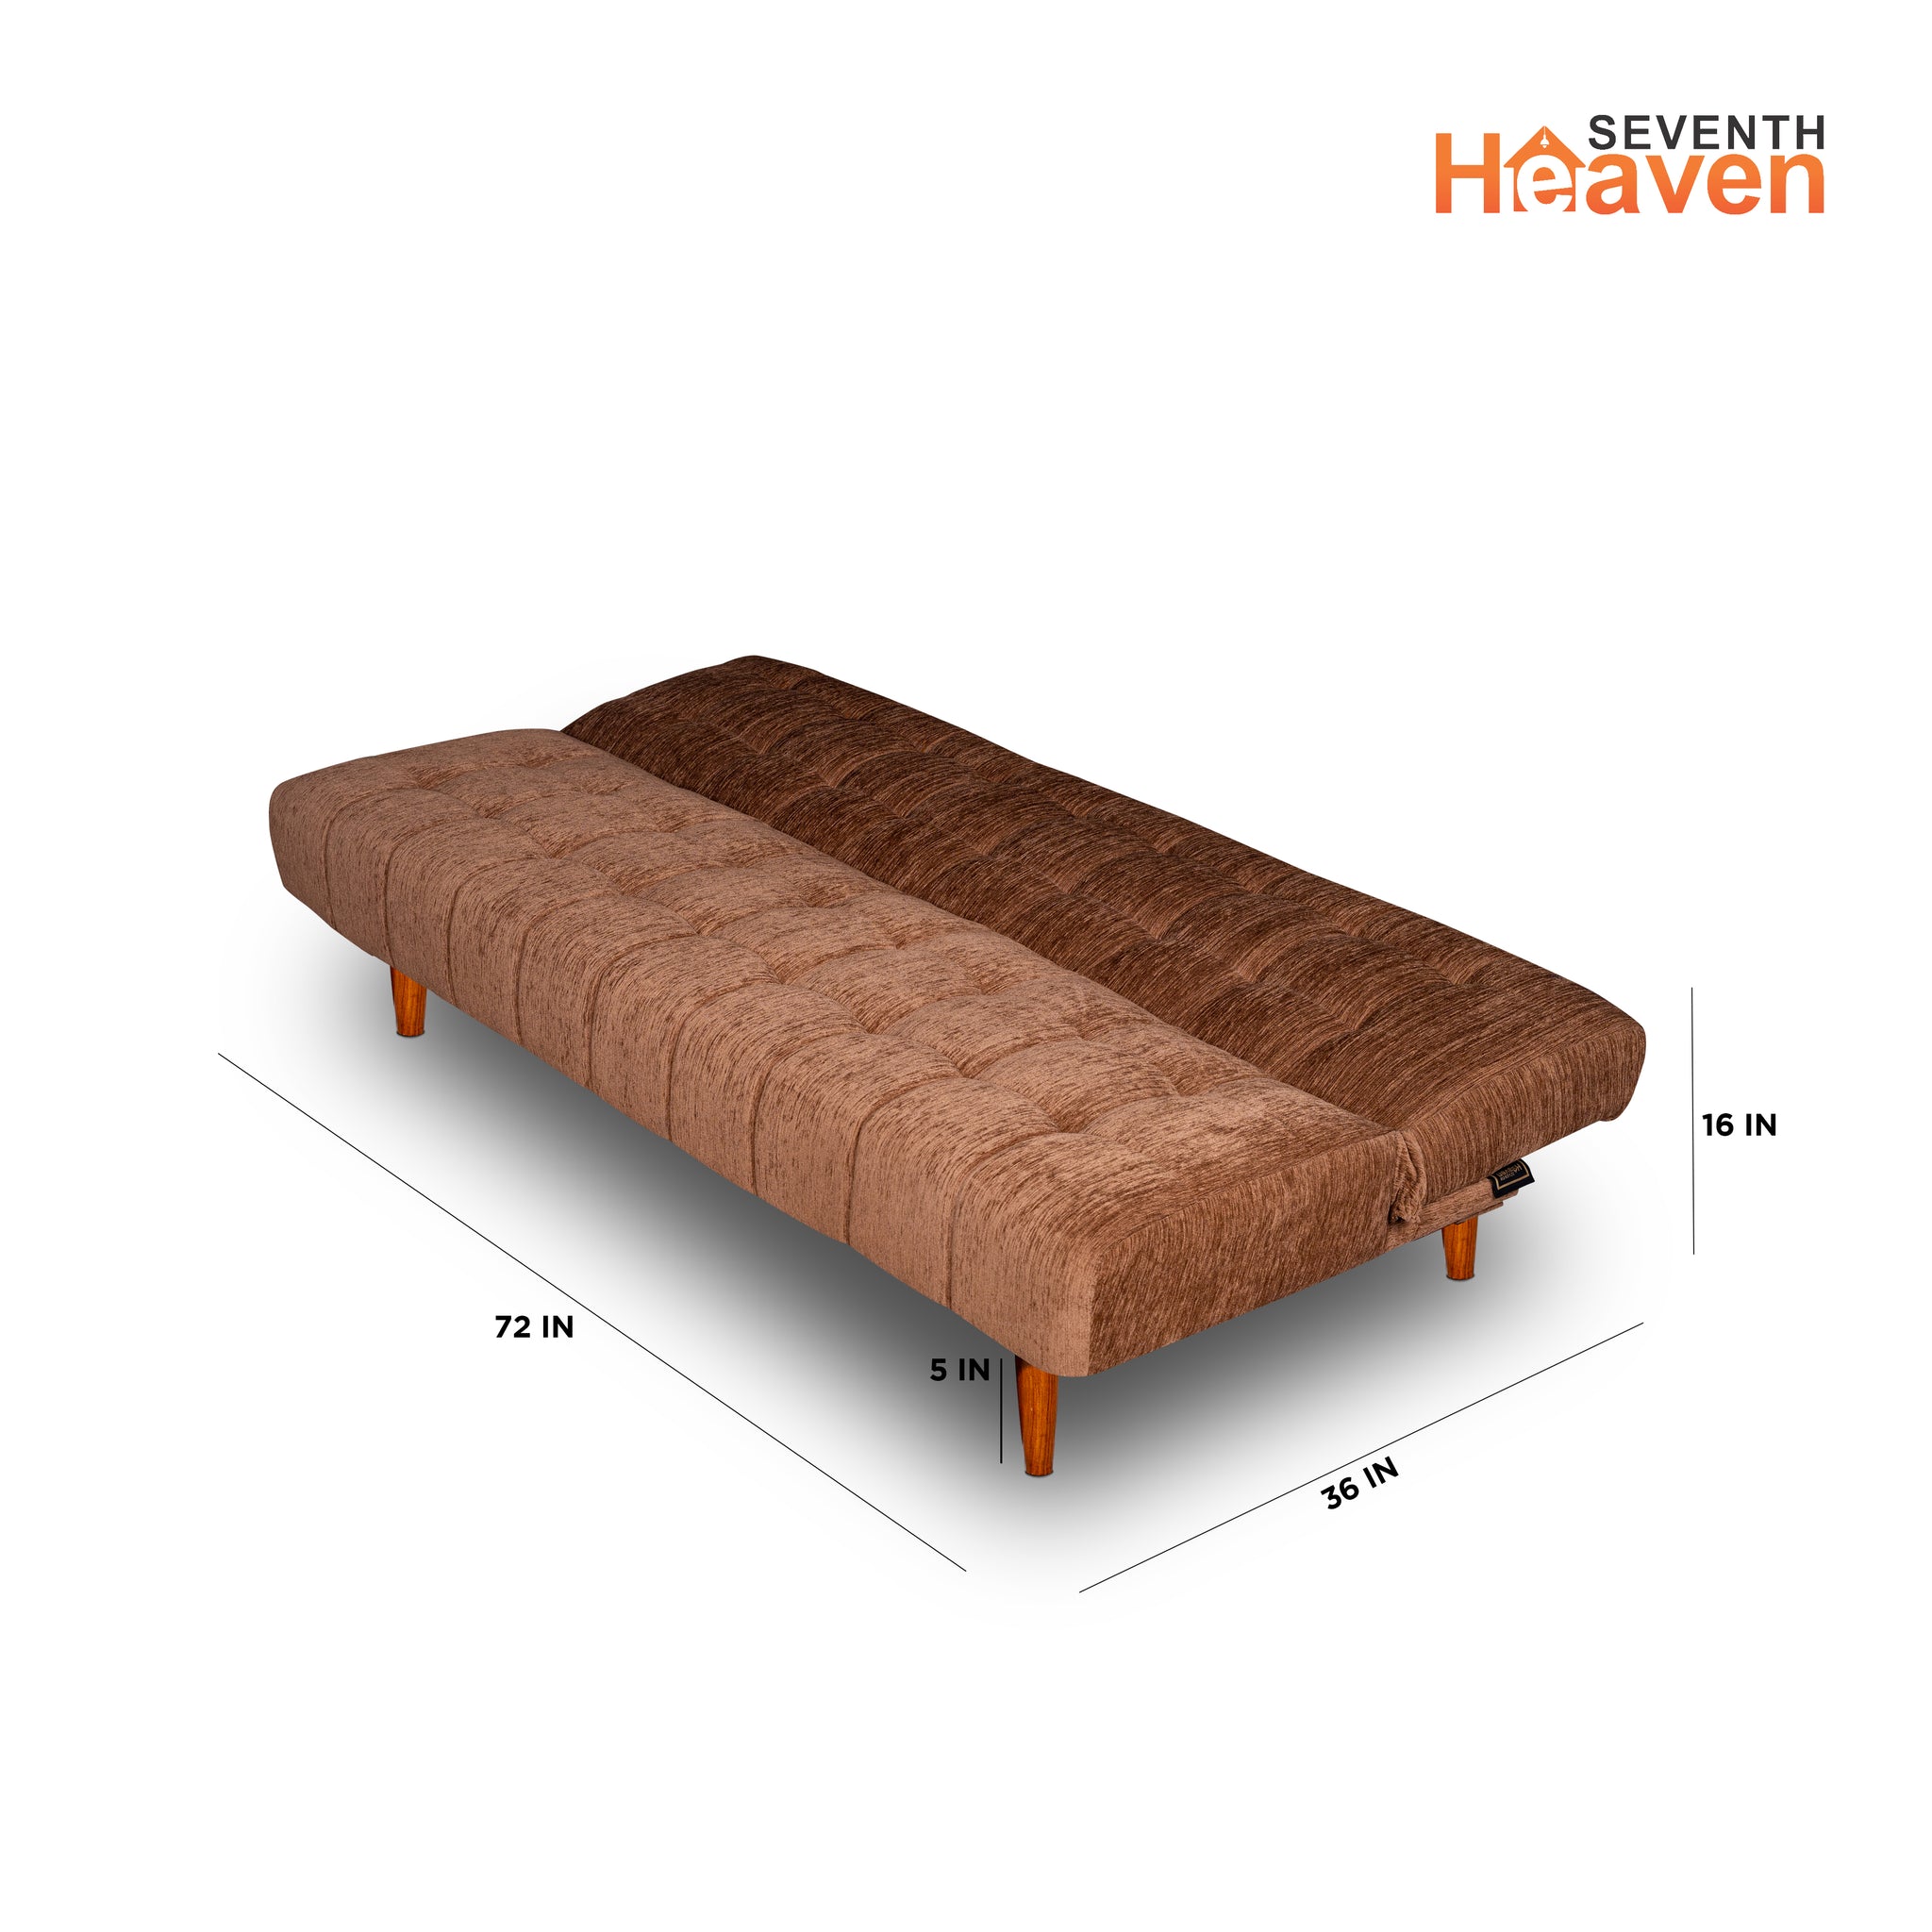 Seventh Heaven Florida Neo 4 Seater Wooden Sofa Cum Bed Modern & Elegant Smart Furniture Range for luxurious homes, living rooms and offices. Use as a sofa, lounger or bed. Perfect for guests. Beige Colour Molphino fabric with sheesham polished wooden legs.